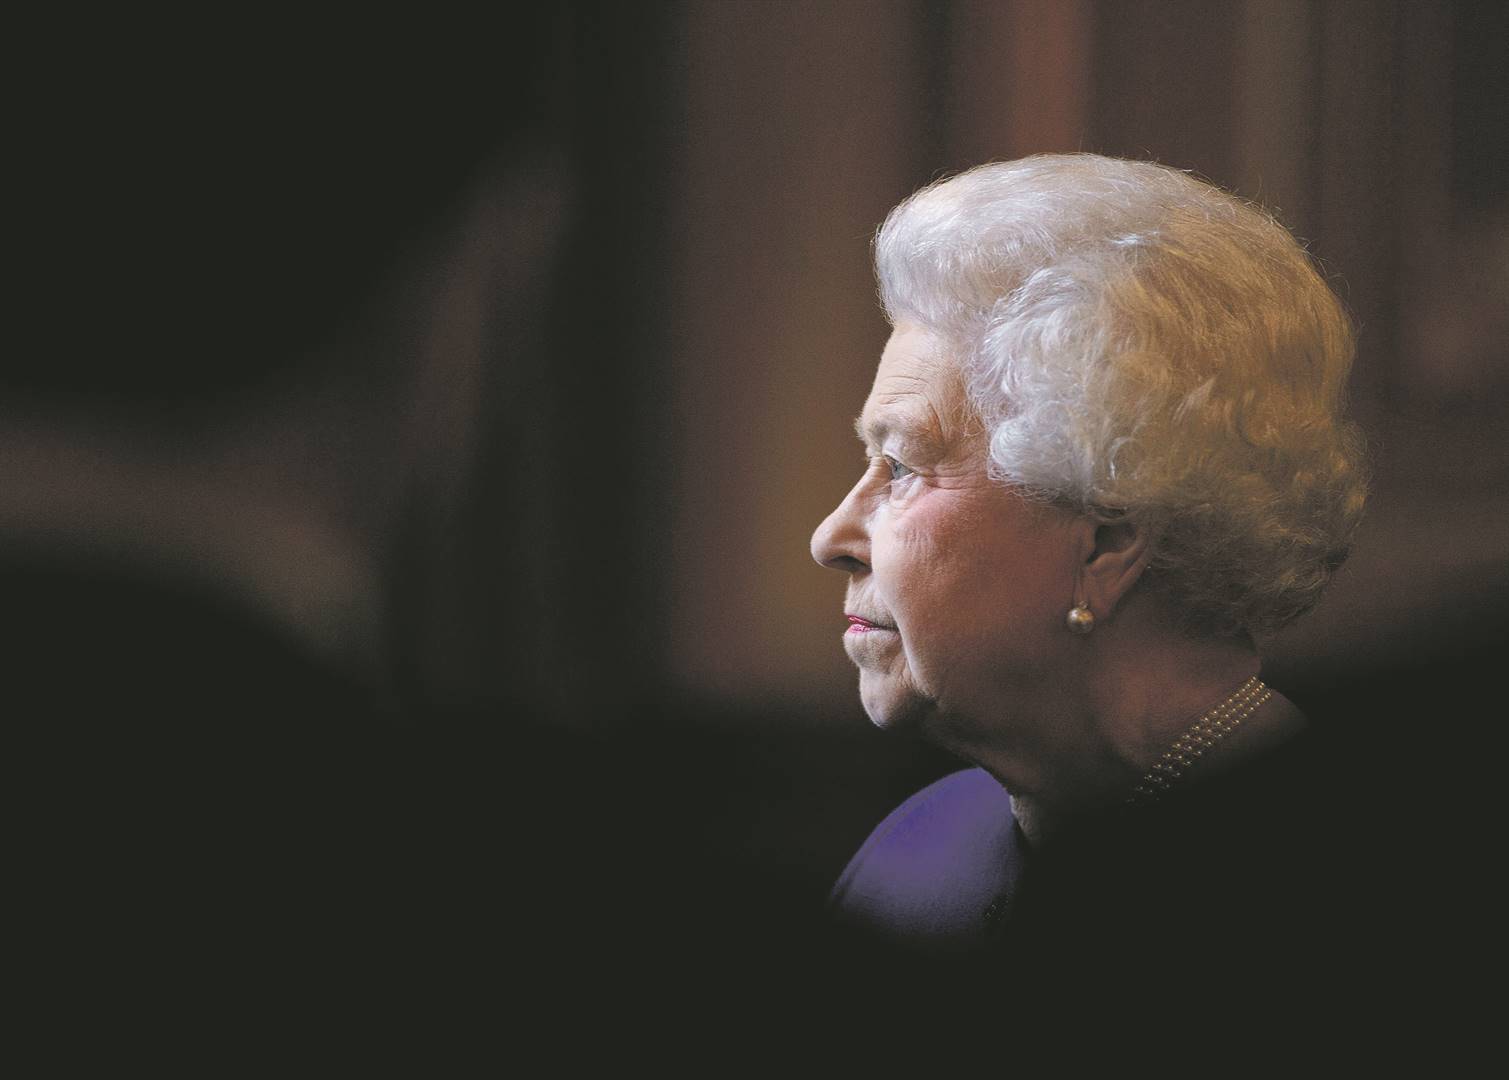 Queen Elizabeth II died on Thursday at the age of 96. Photo: Alastair Grant / reuters